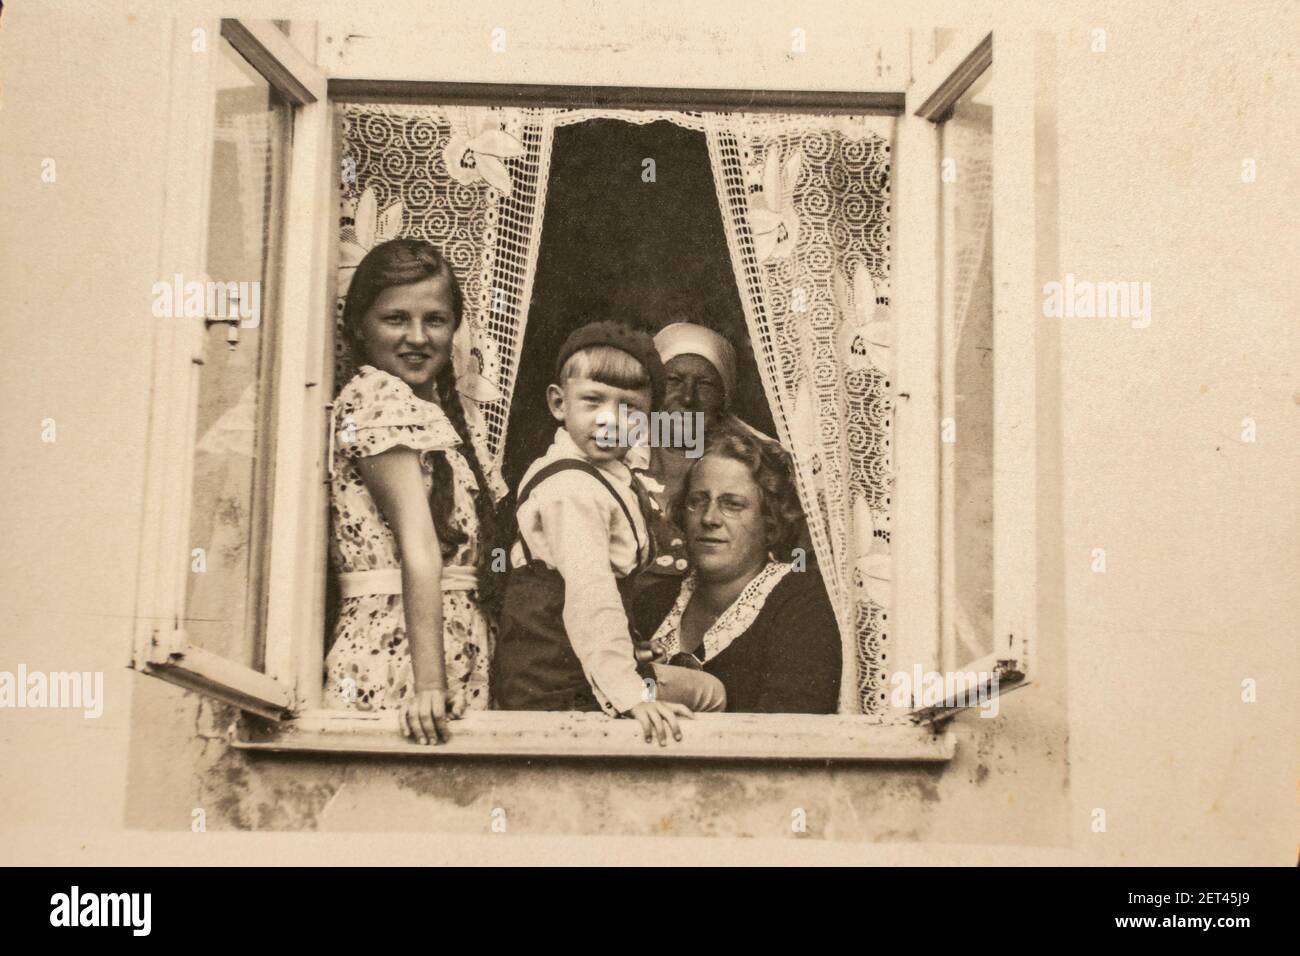 Latvia - CIRCA 1930s: A family sitting together in a window sill group shot. Children lived in a three generation family household. Vintage art deco e Stock Photo